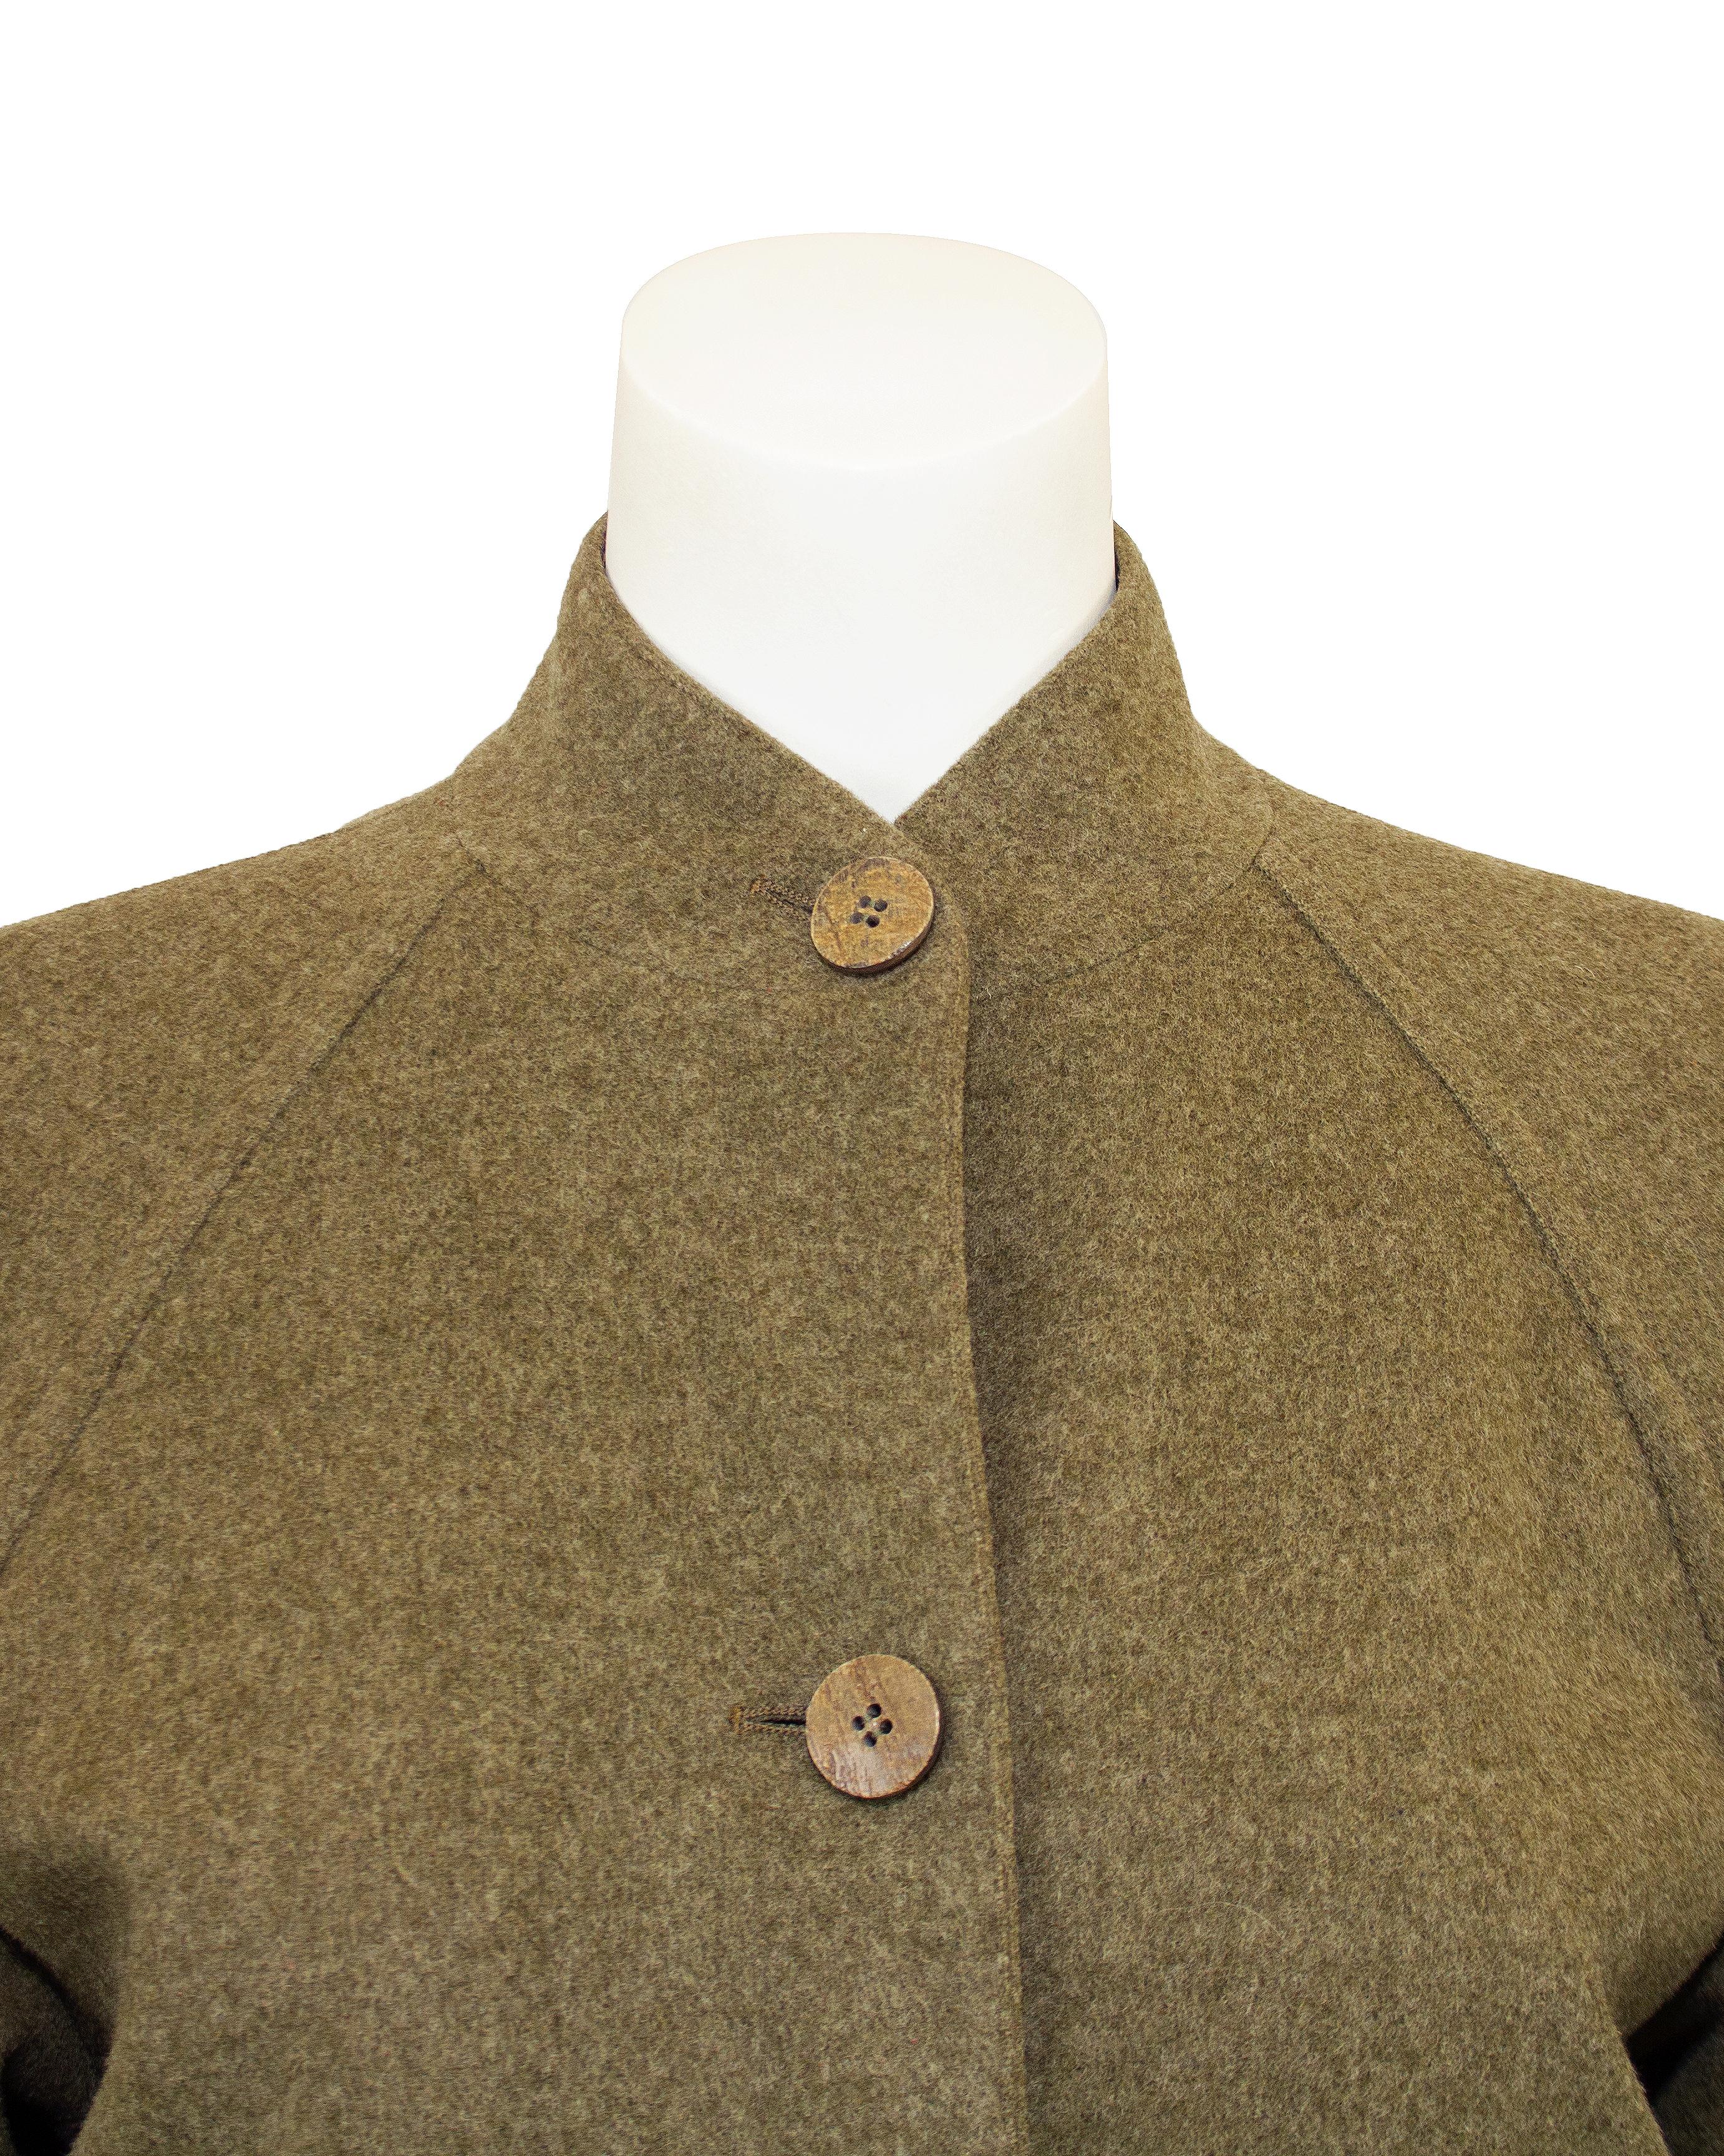 Women's 1980s Hermes Olive Green Wool and Cashmere Jacket and Skirt Ensemble  For Sale